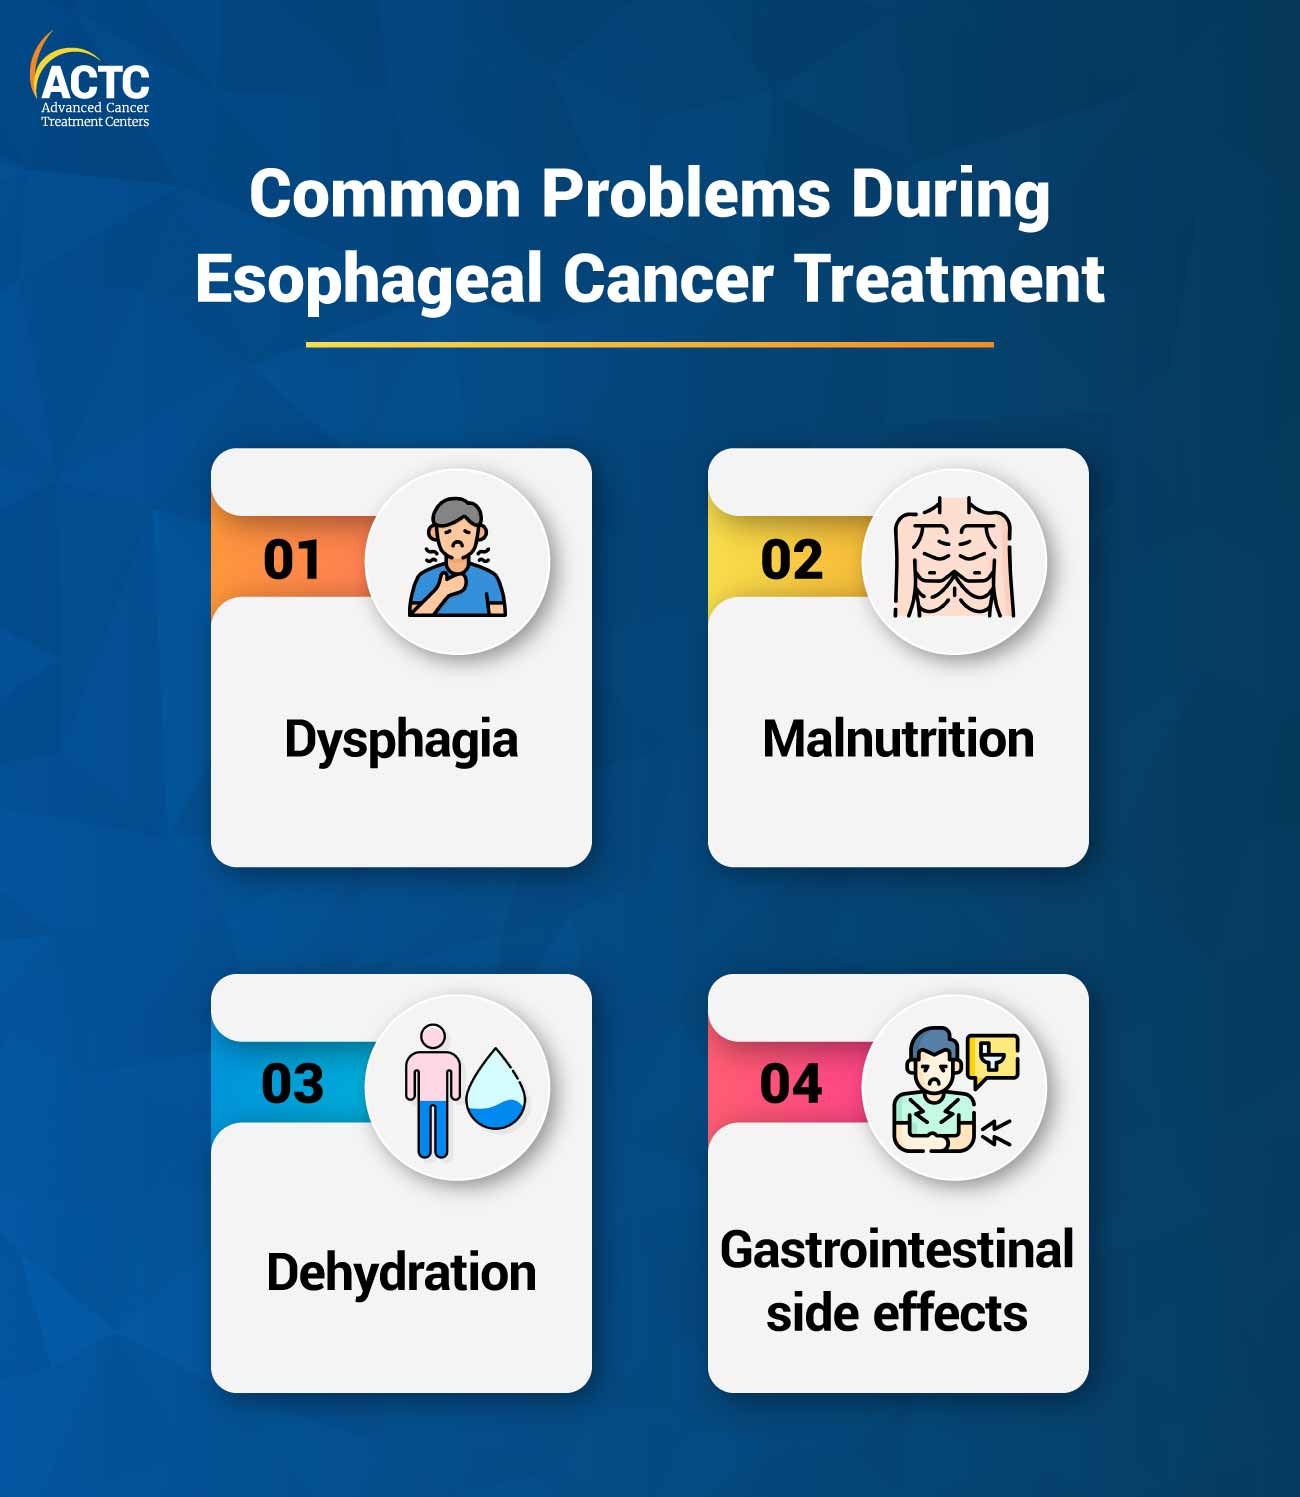 Common Problems During Esophageal Cancer Treatment